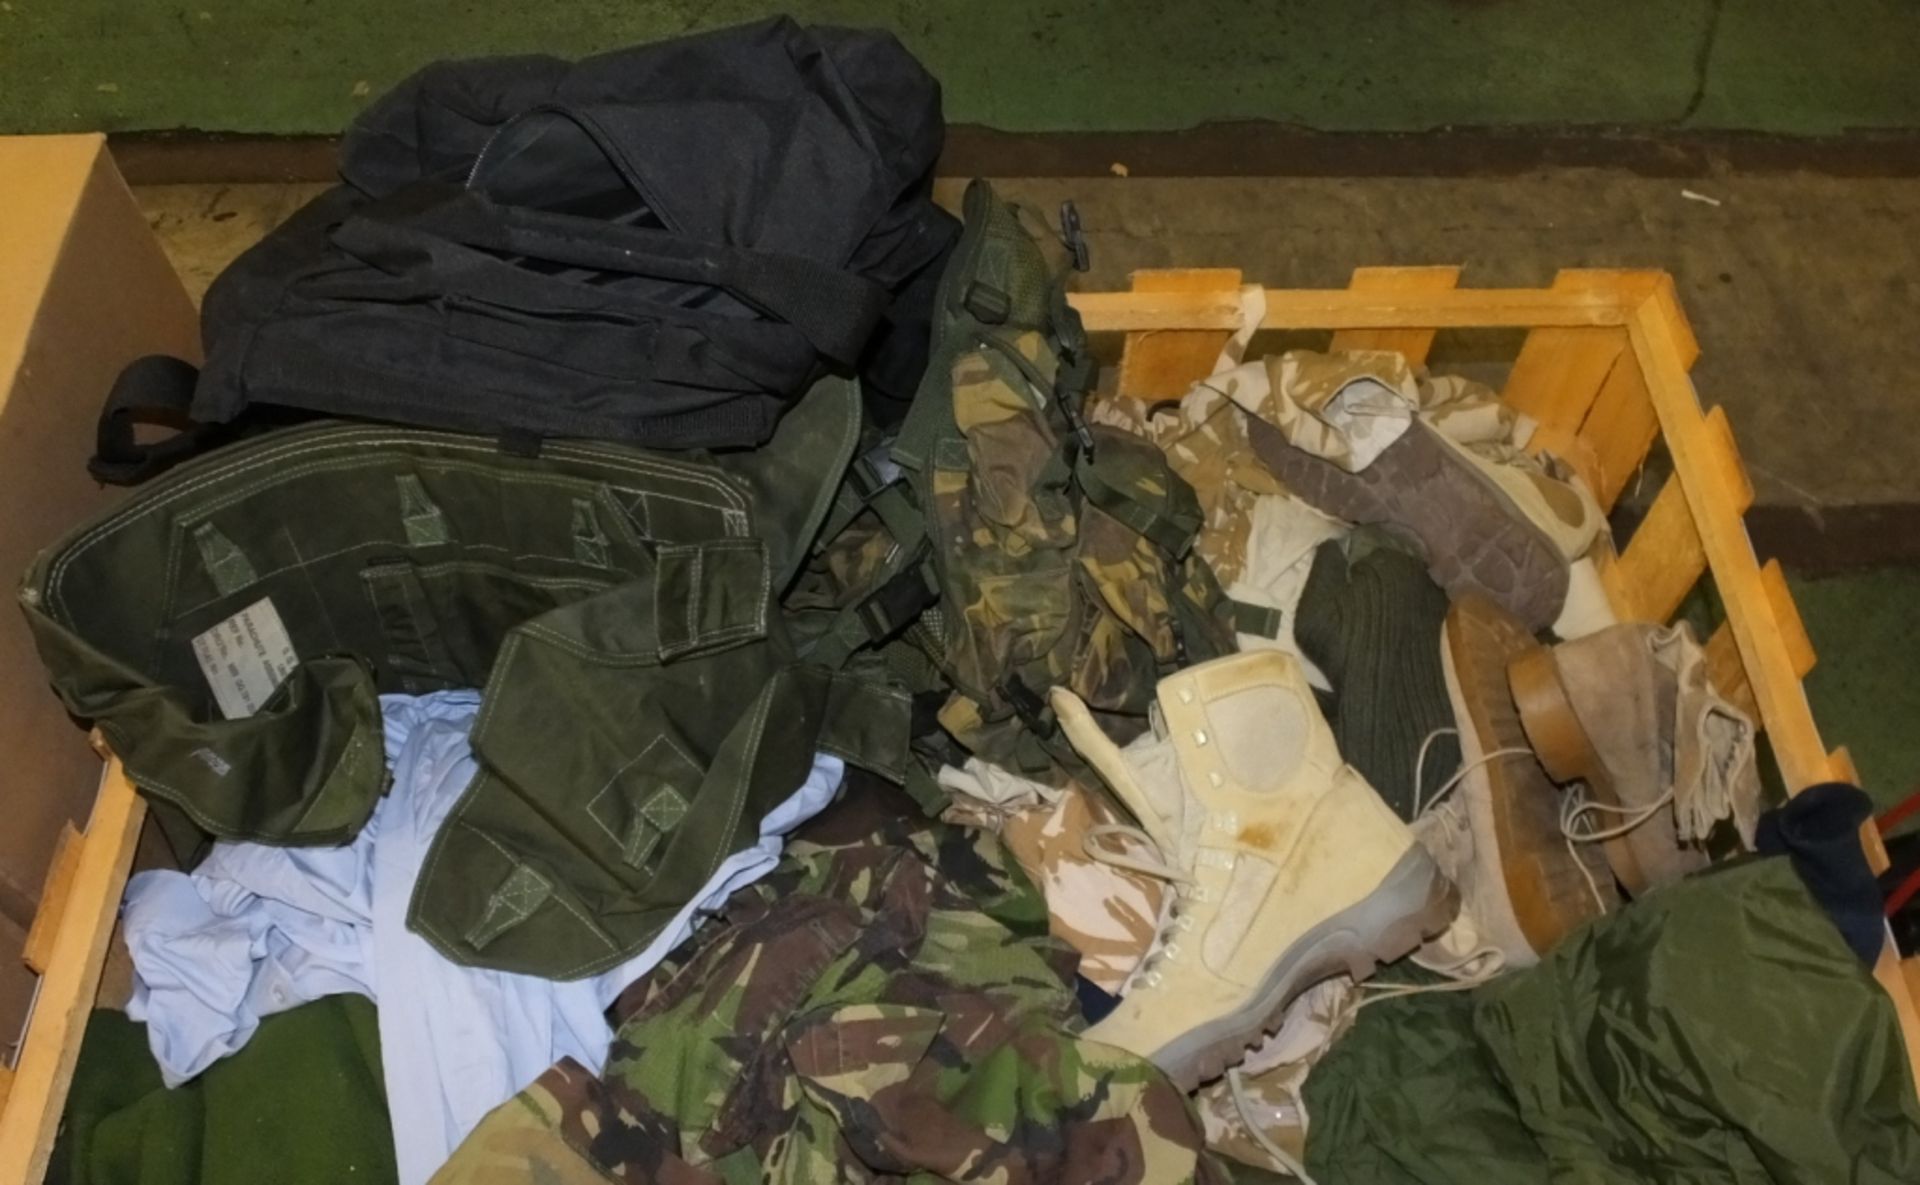 Military clothing - Boots, Jackets, Jumpers, Trousers, Shirts, Holdall bags - Image 3 of 3